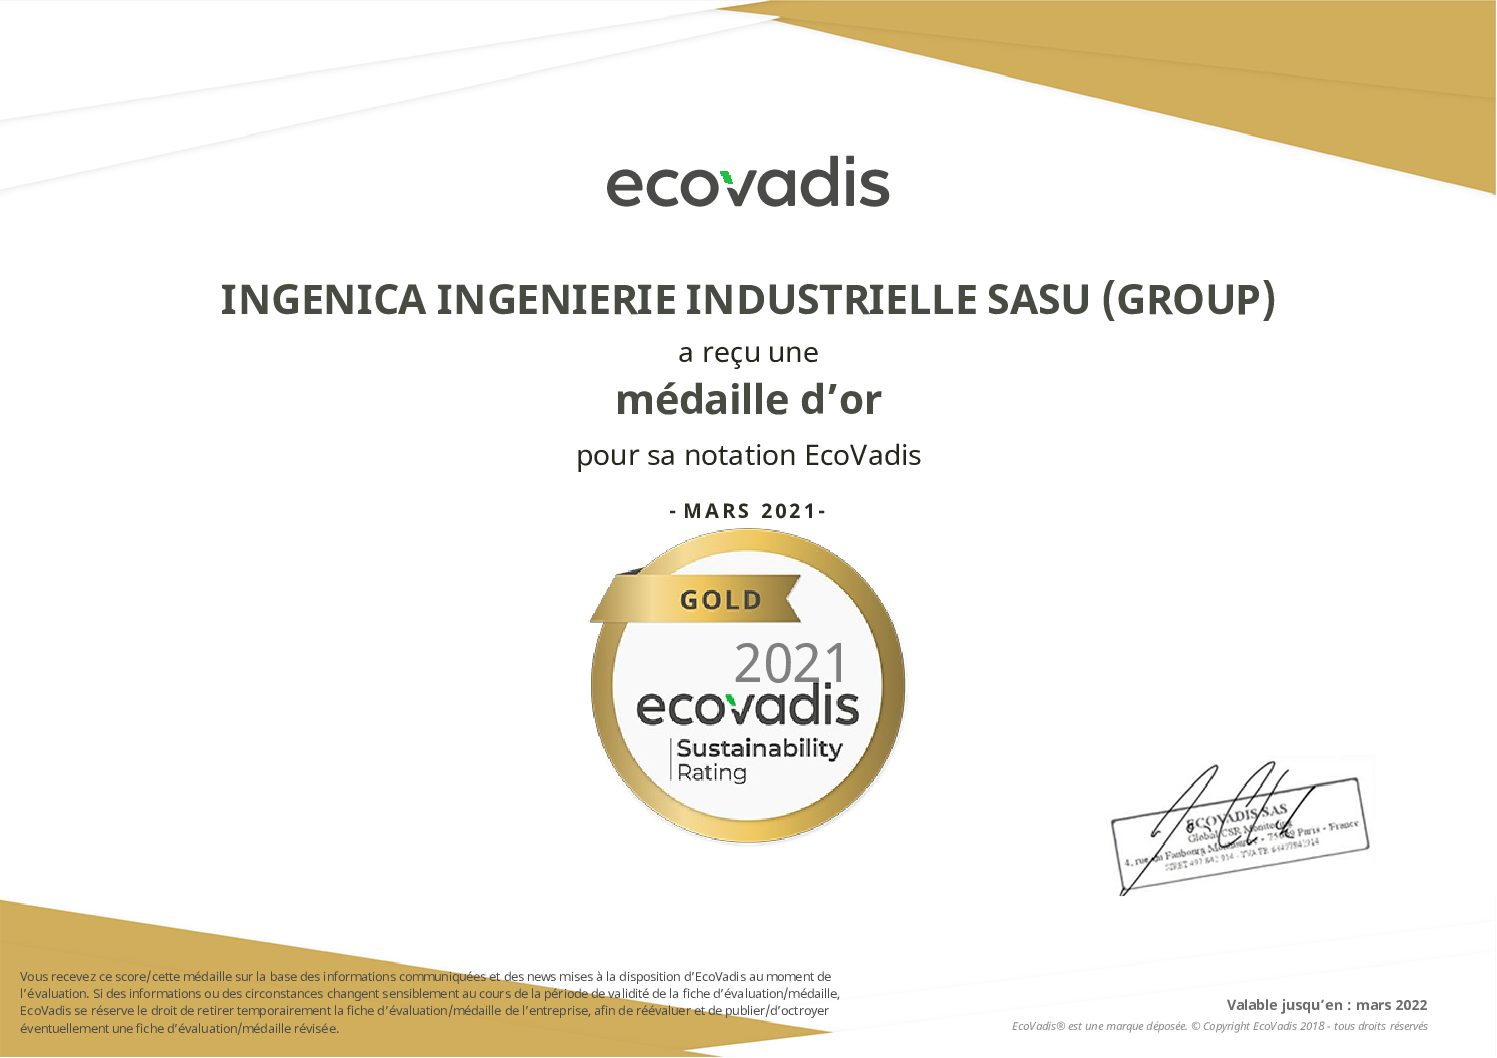 INGENICA renews its EcoVadis GOLD label for 2021 !